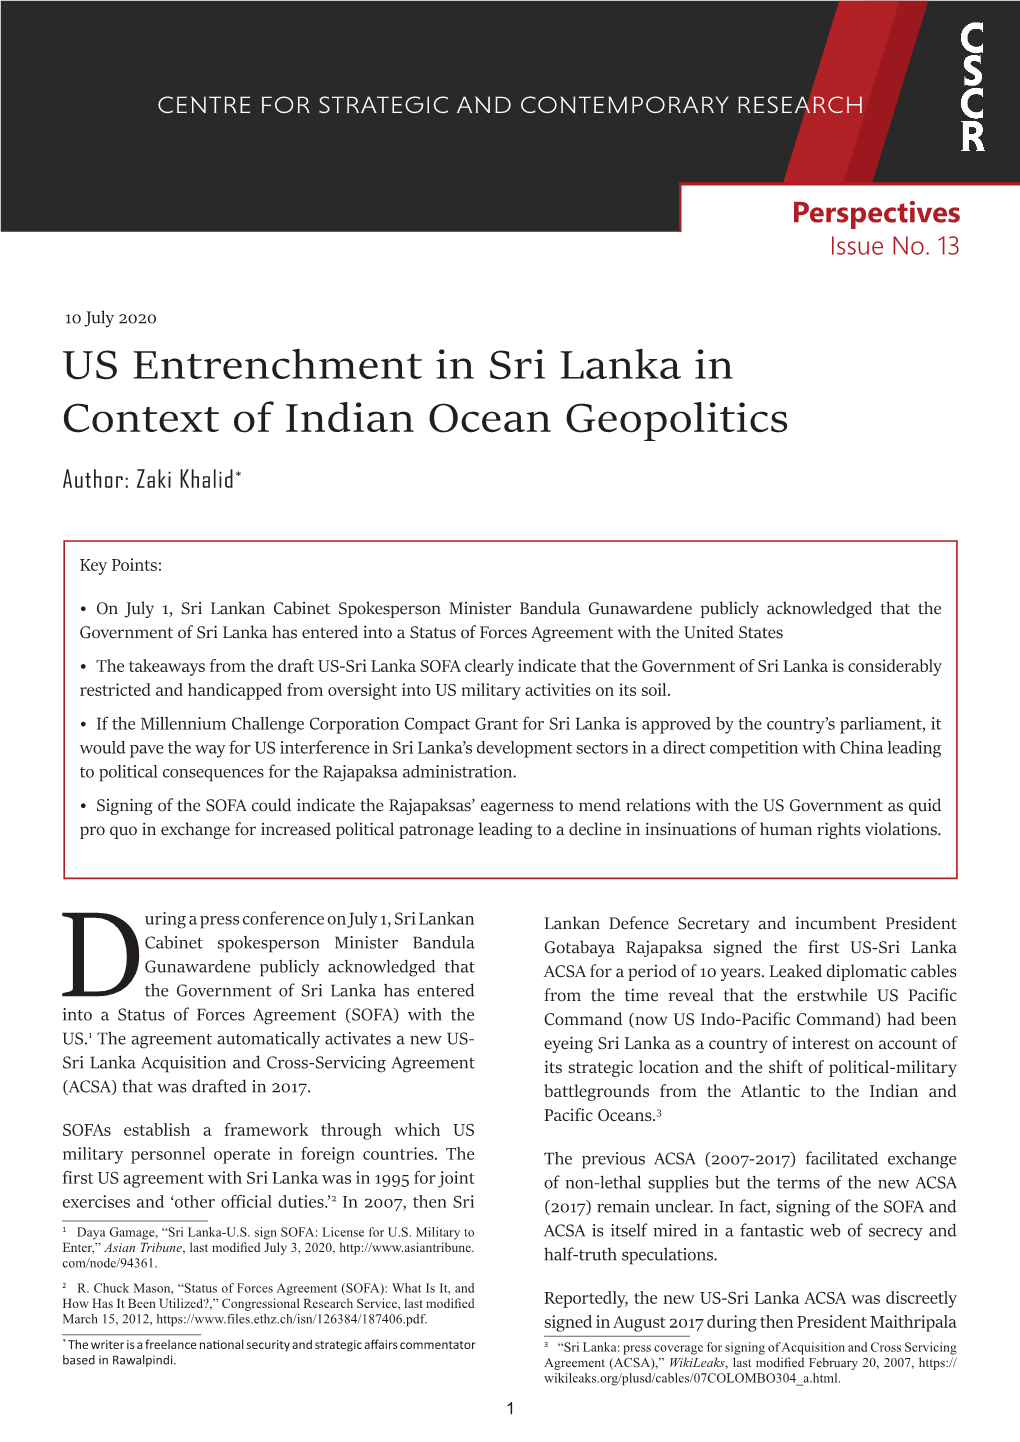 US Entrenchment in Sri Lanka in Context of Indian Ocean Geopolitics